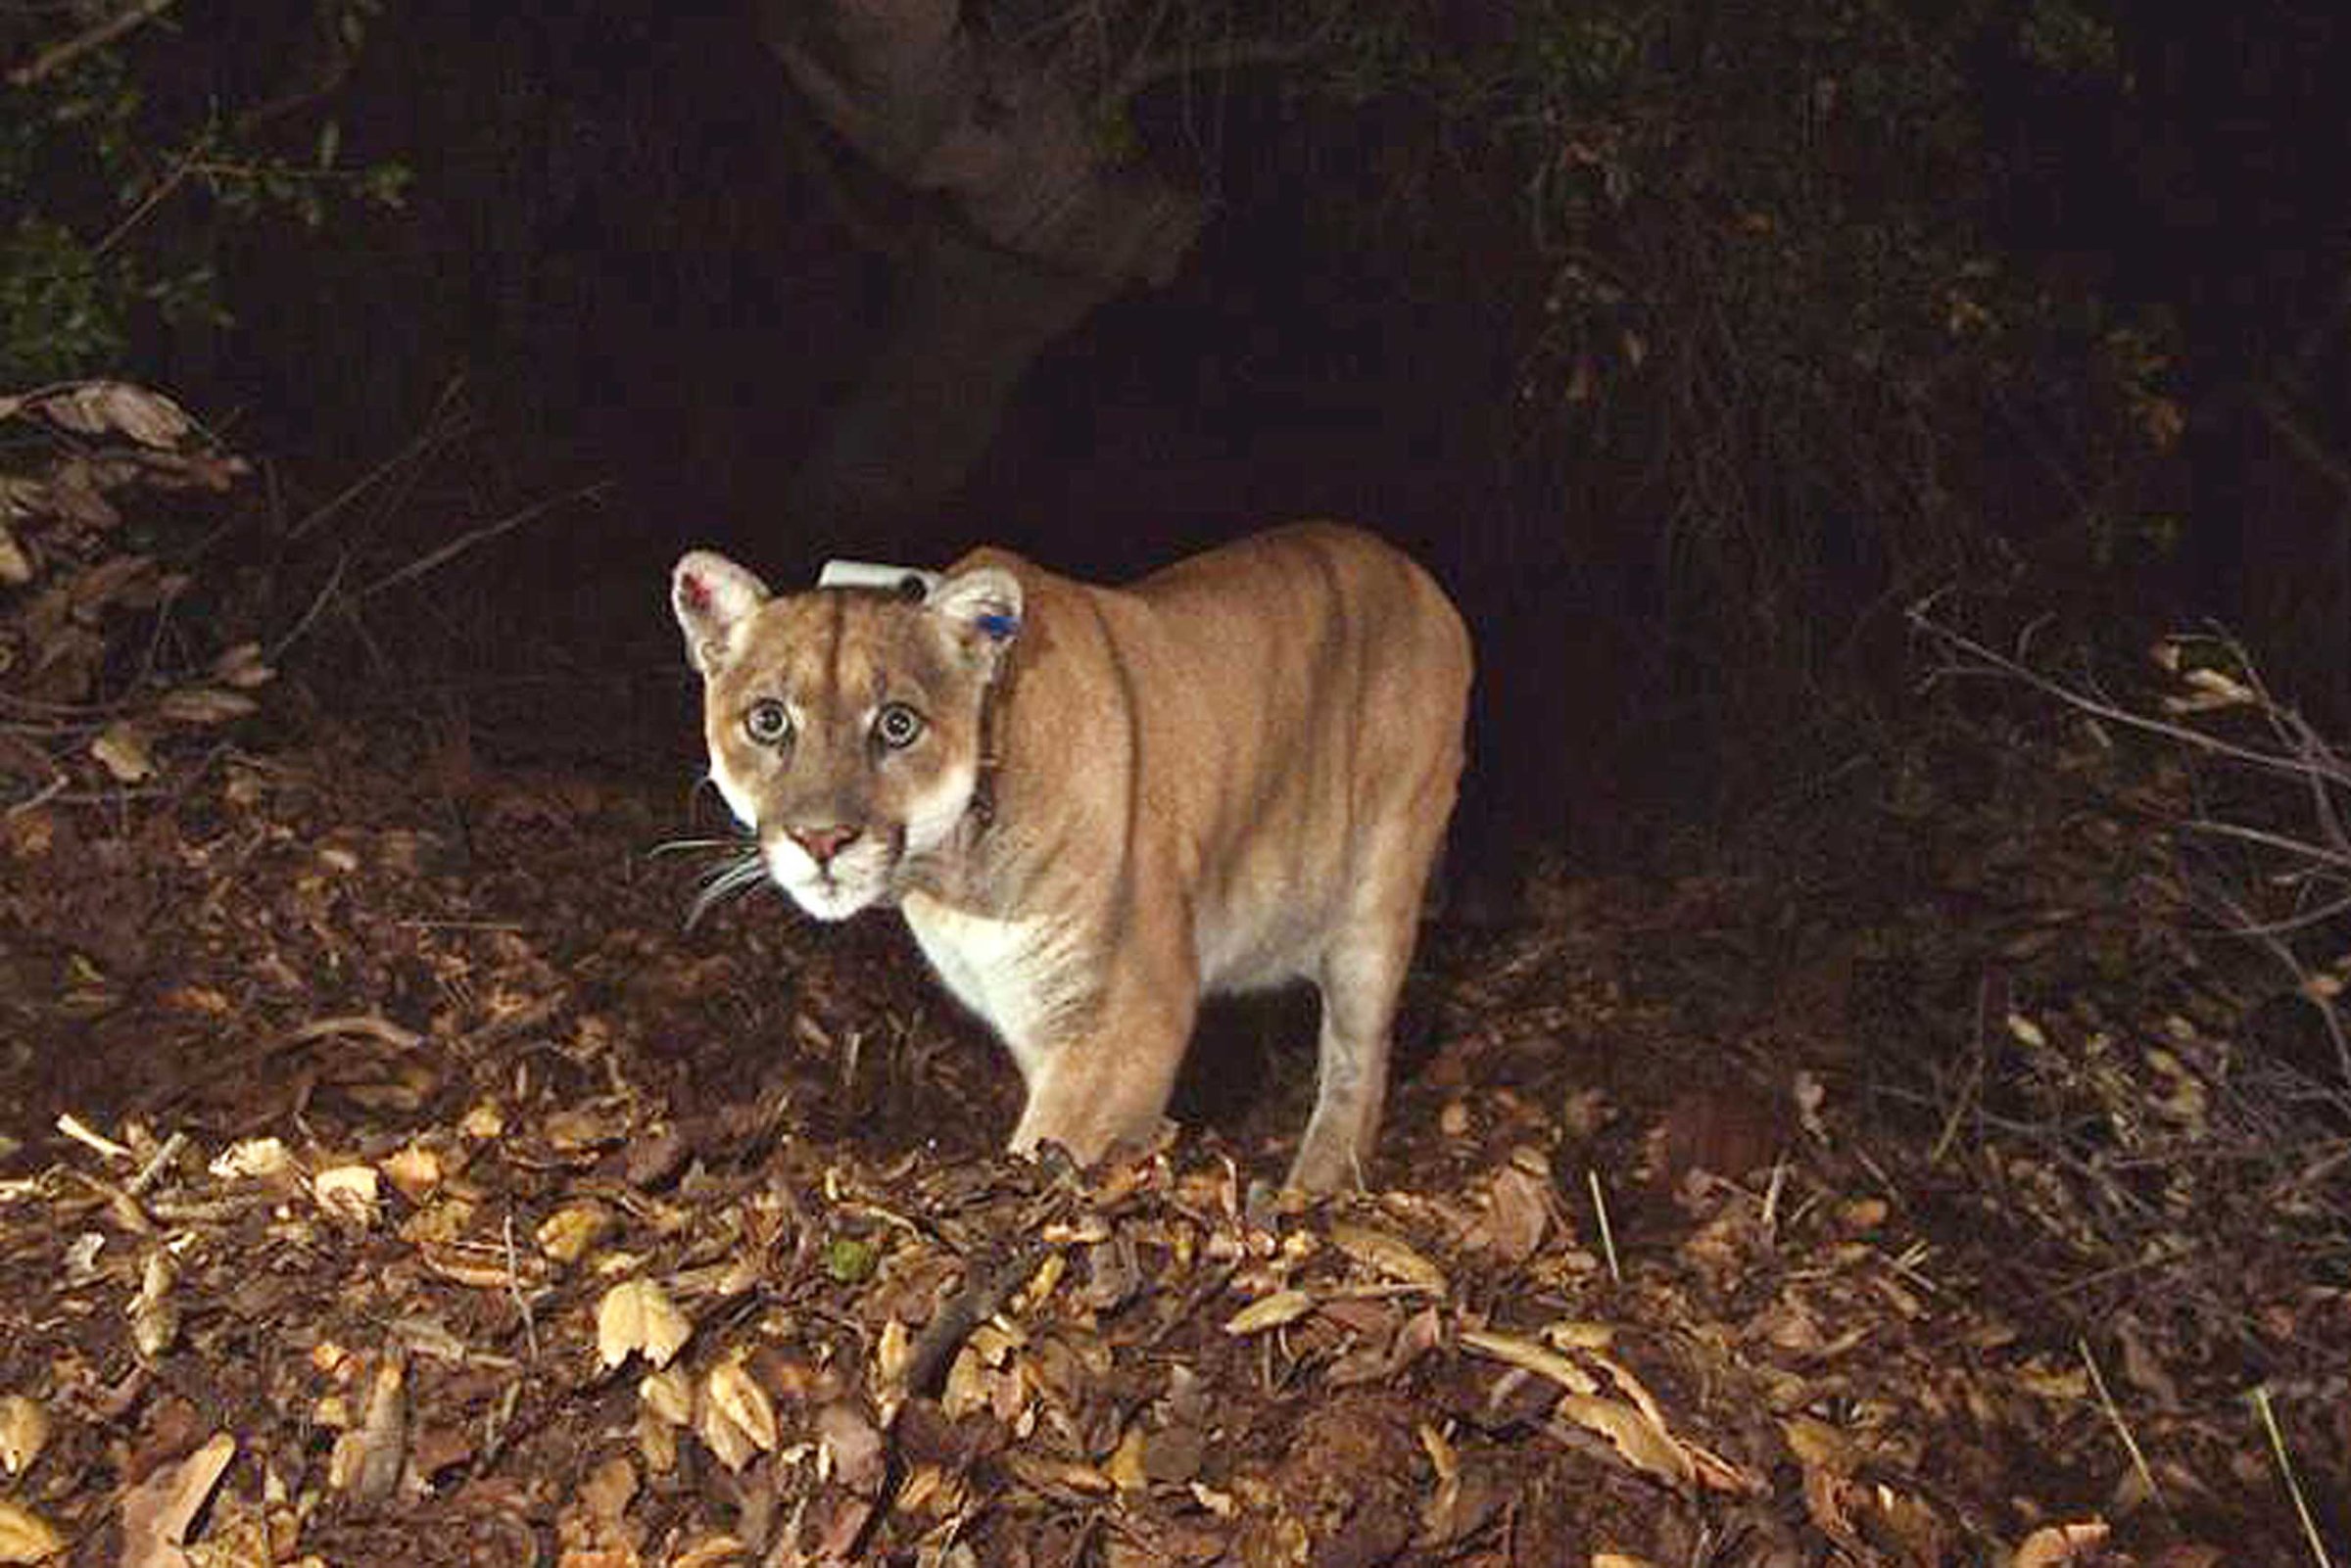 This Nov. 2014 photo provided by the National Park Service shows the mountain lion known as P-22, the mountain lion living in Los Angeles' Griffith Park.